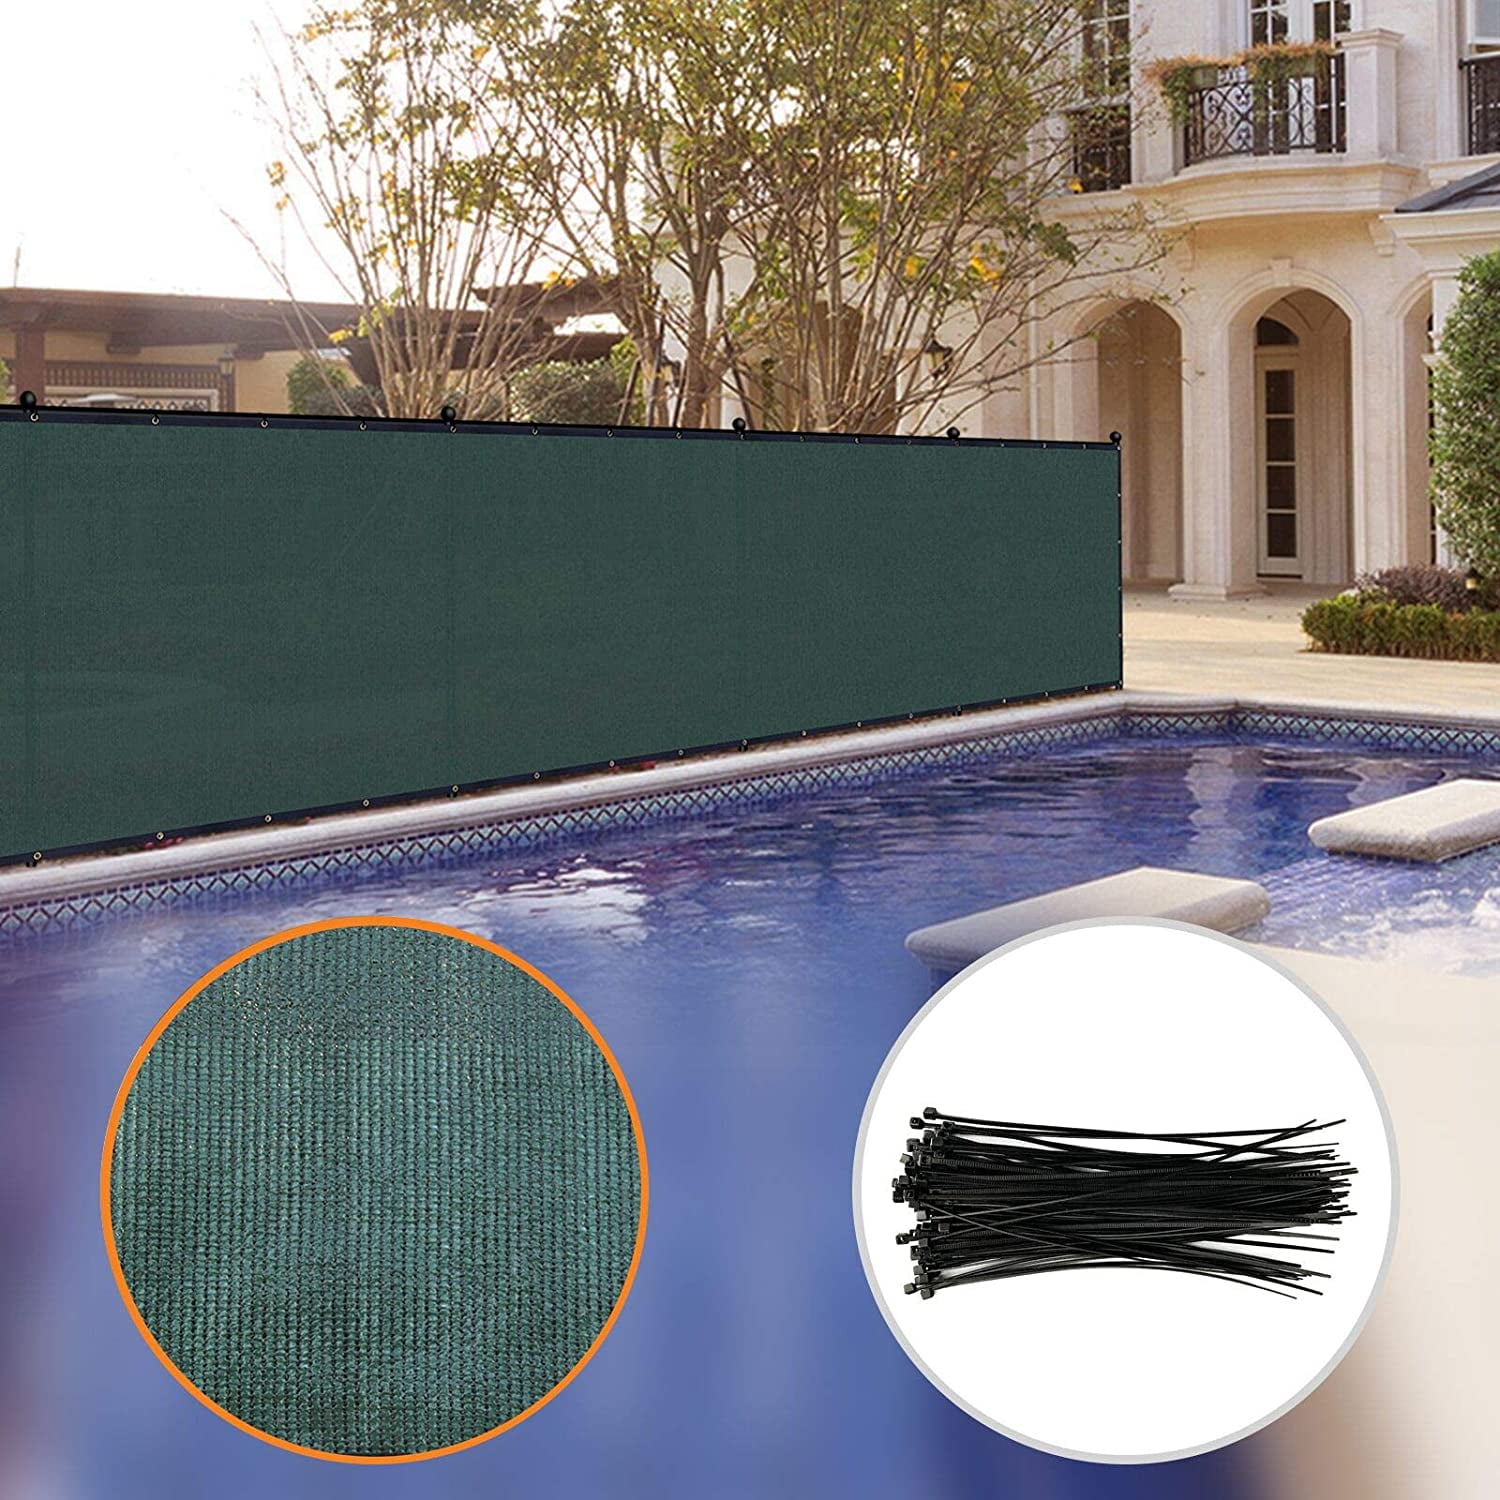 5’8”x50’ Fence Privacy Screen Heavy Duty for 6’x50’ Chain Link Fence Fabric  Screen with Brass Grommets Outdoor 6ft Patio Construction Fencing 90%